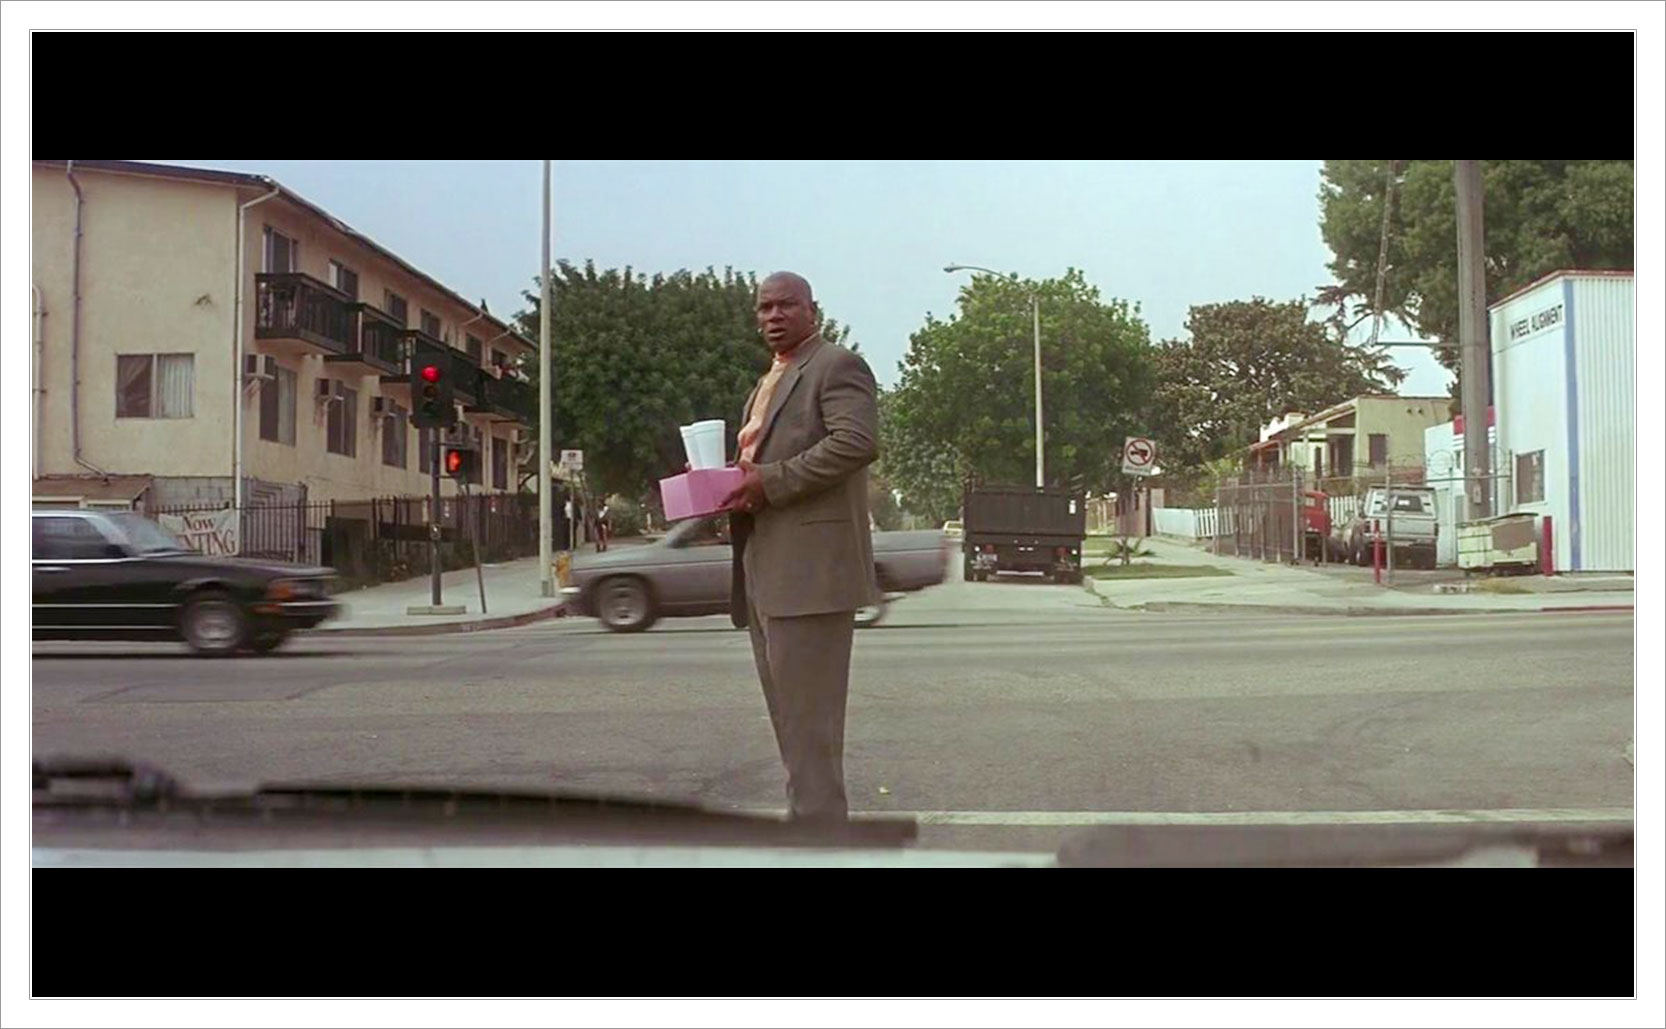 the character of Marsellus Wallace crossing the street in Pulp Fiction carrying a box of doughnuts